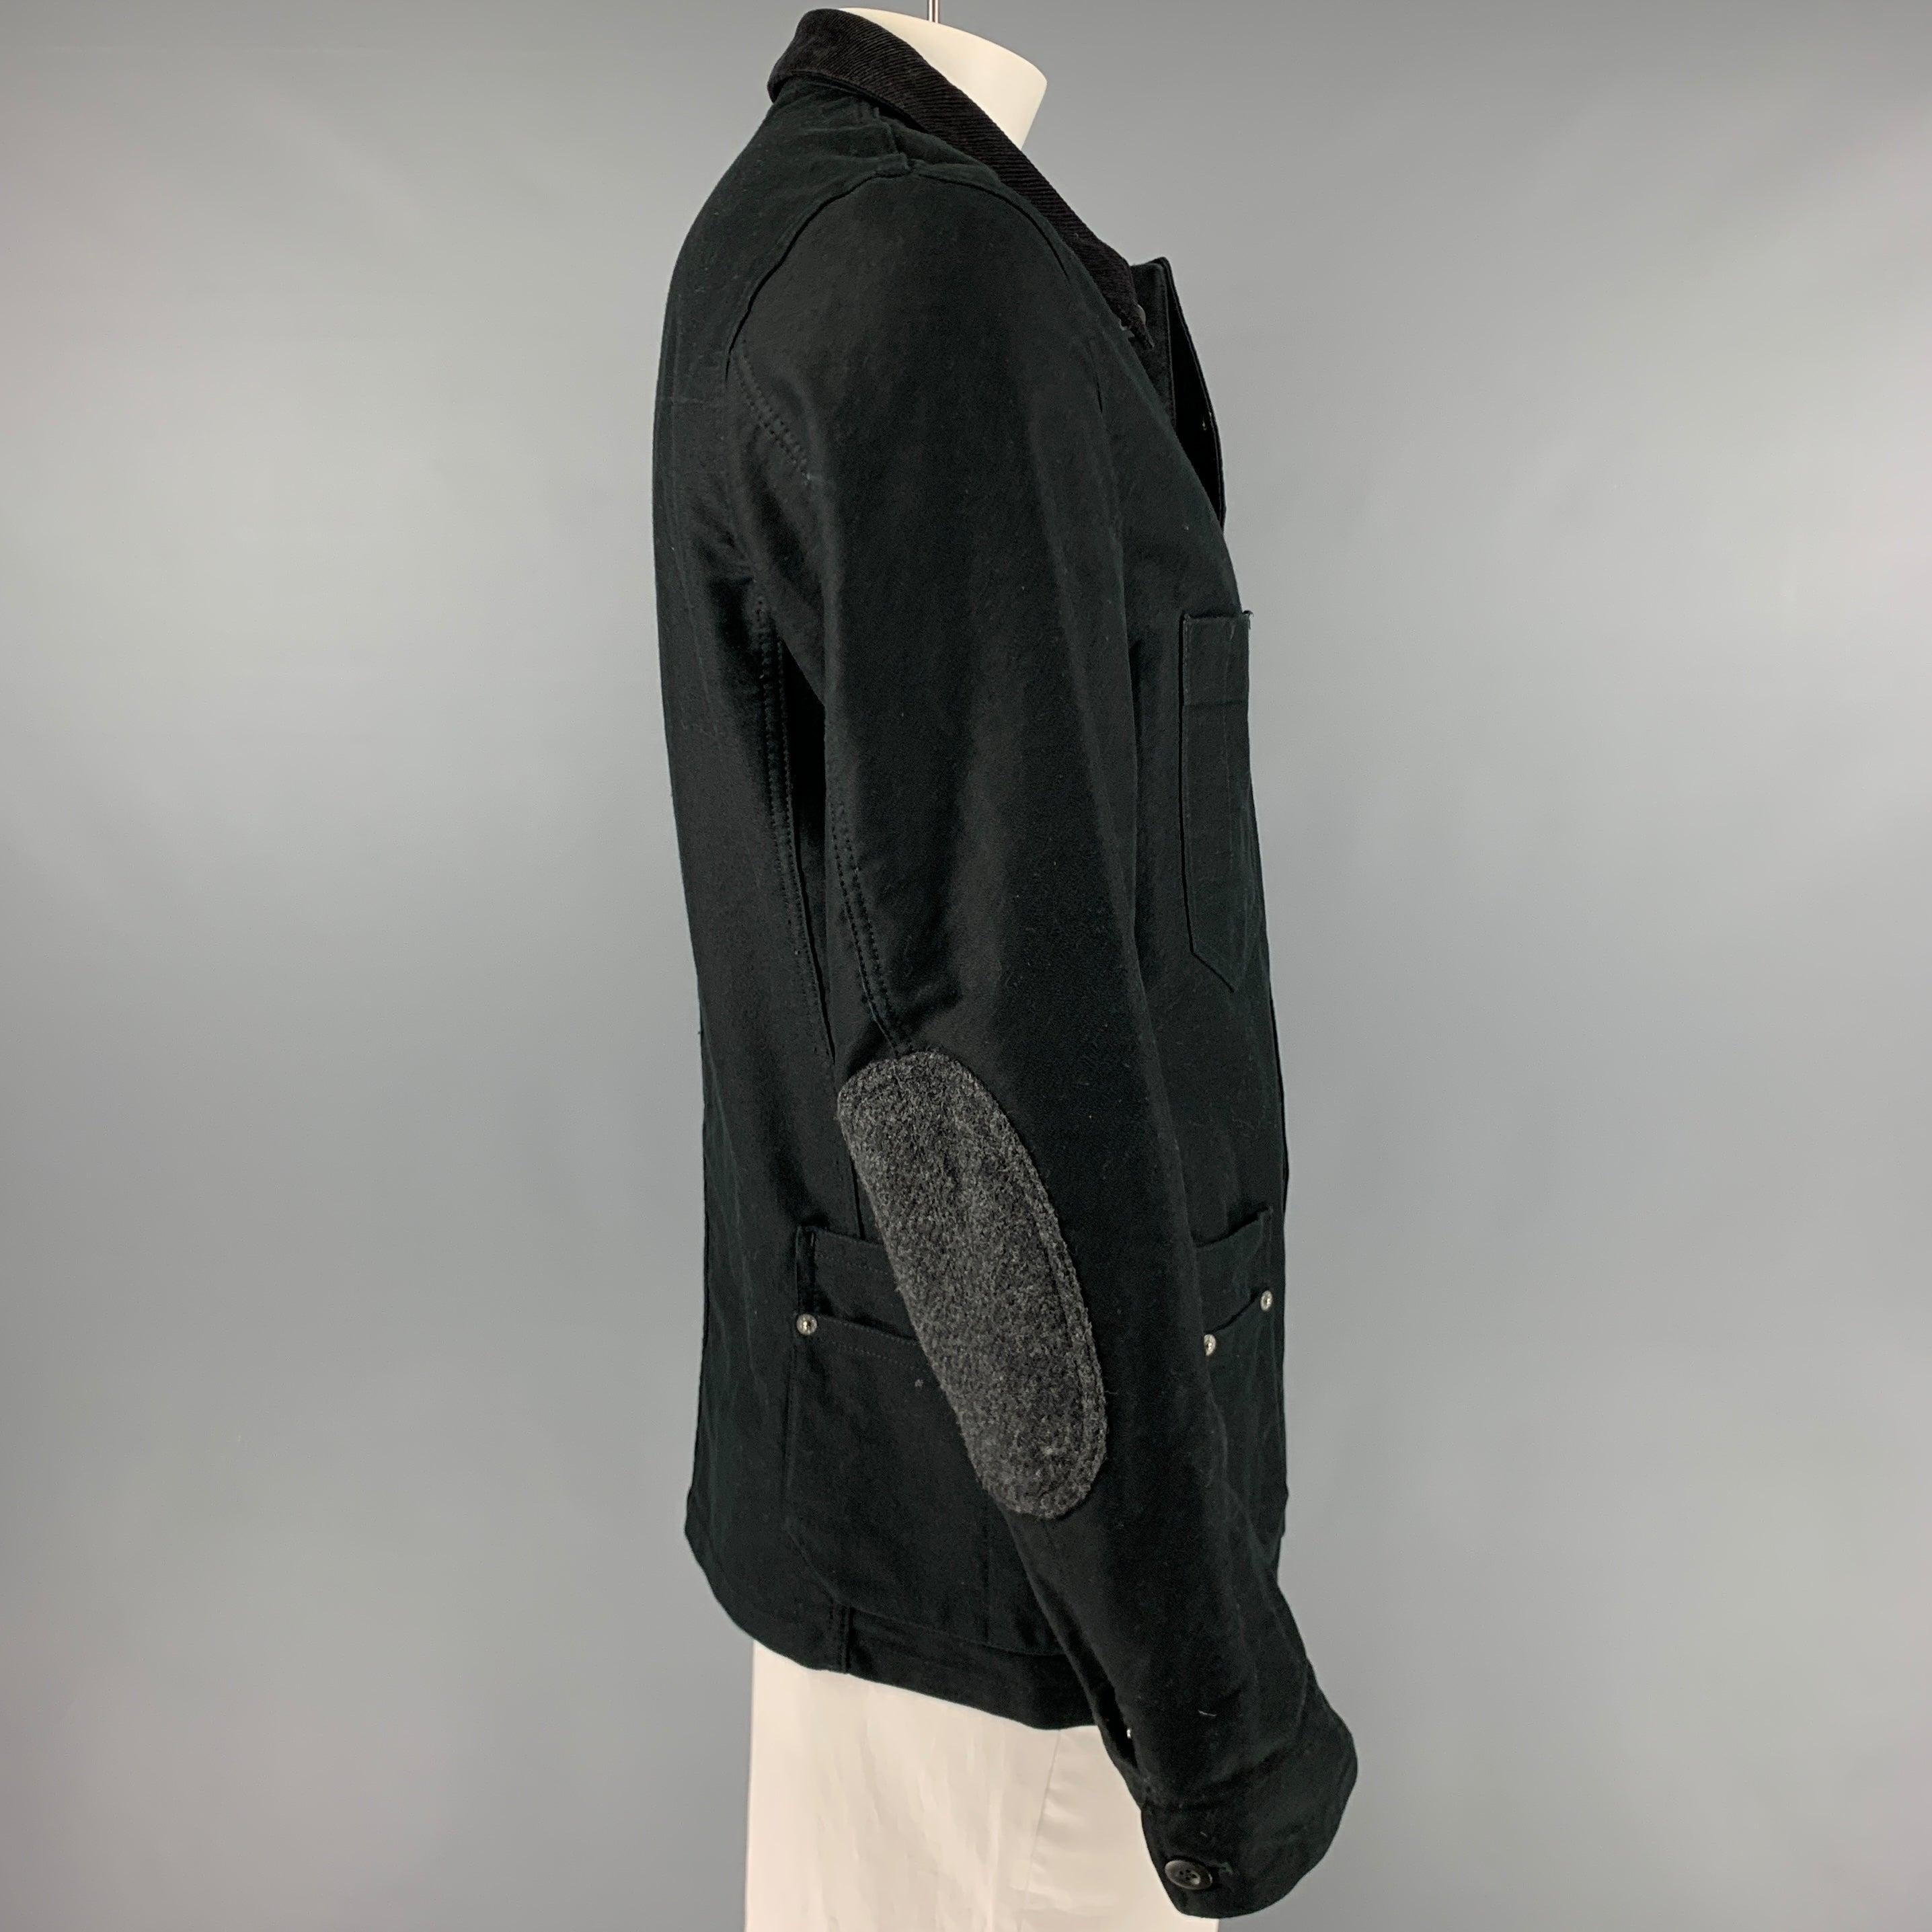 JUNYA WATANABE jacket
in a black cotton fabric featuring a worker style with multiple utilitarian pockets, leather pocket detail, ribbed collar, elbow patches, and button closure. Made in Japan.Excellent Pre-Owned Condition. Minor marks on button